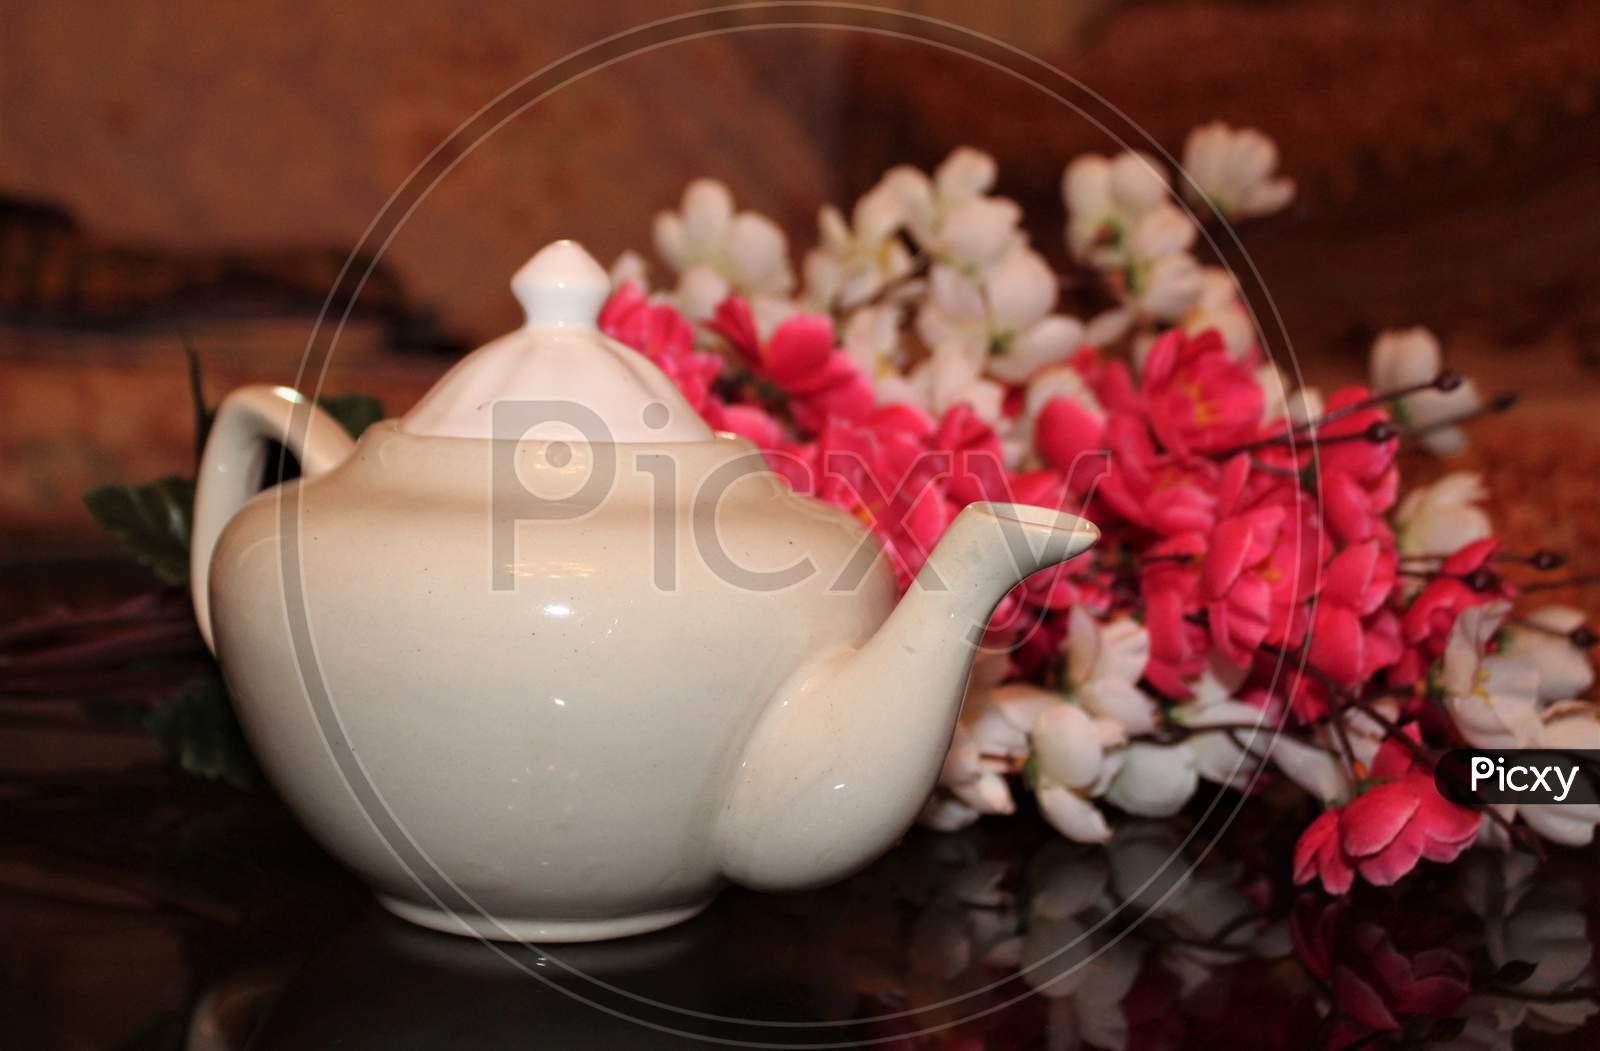 This picture shows a white tea pot with pink flowers